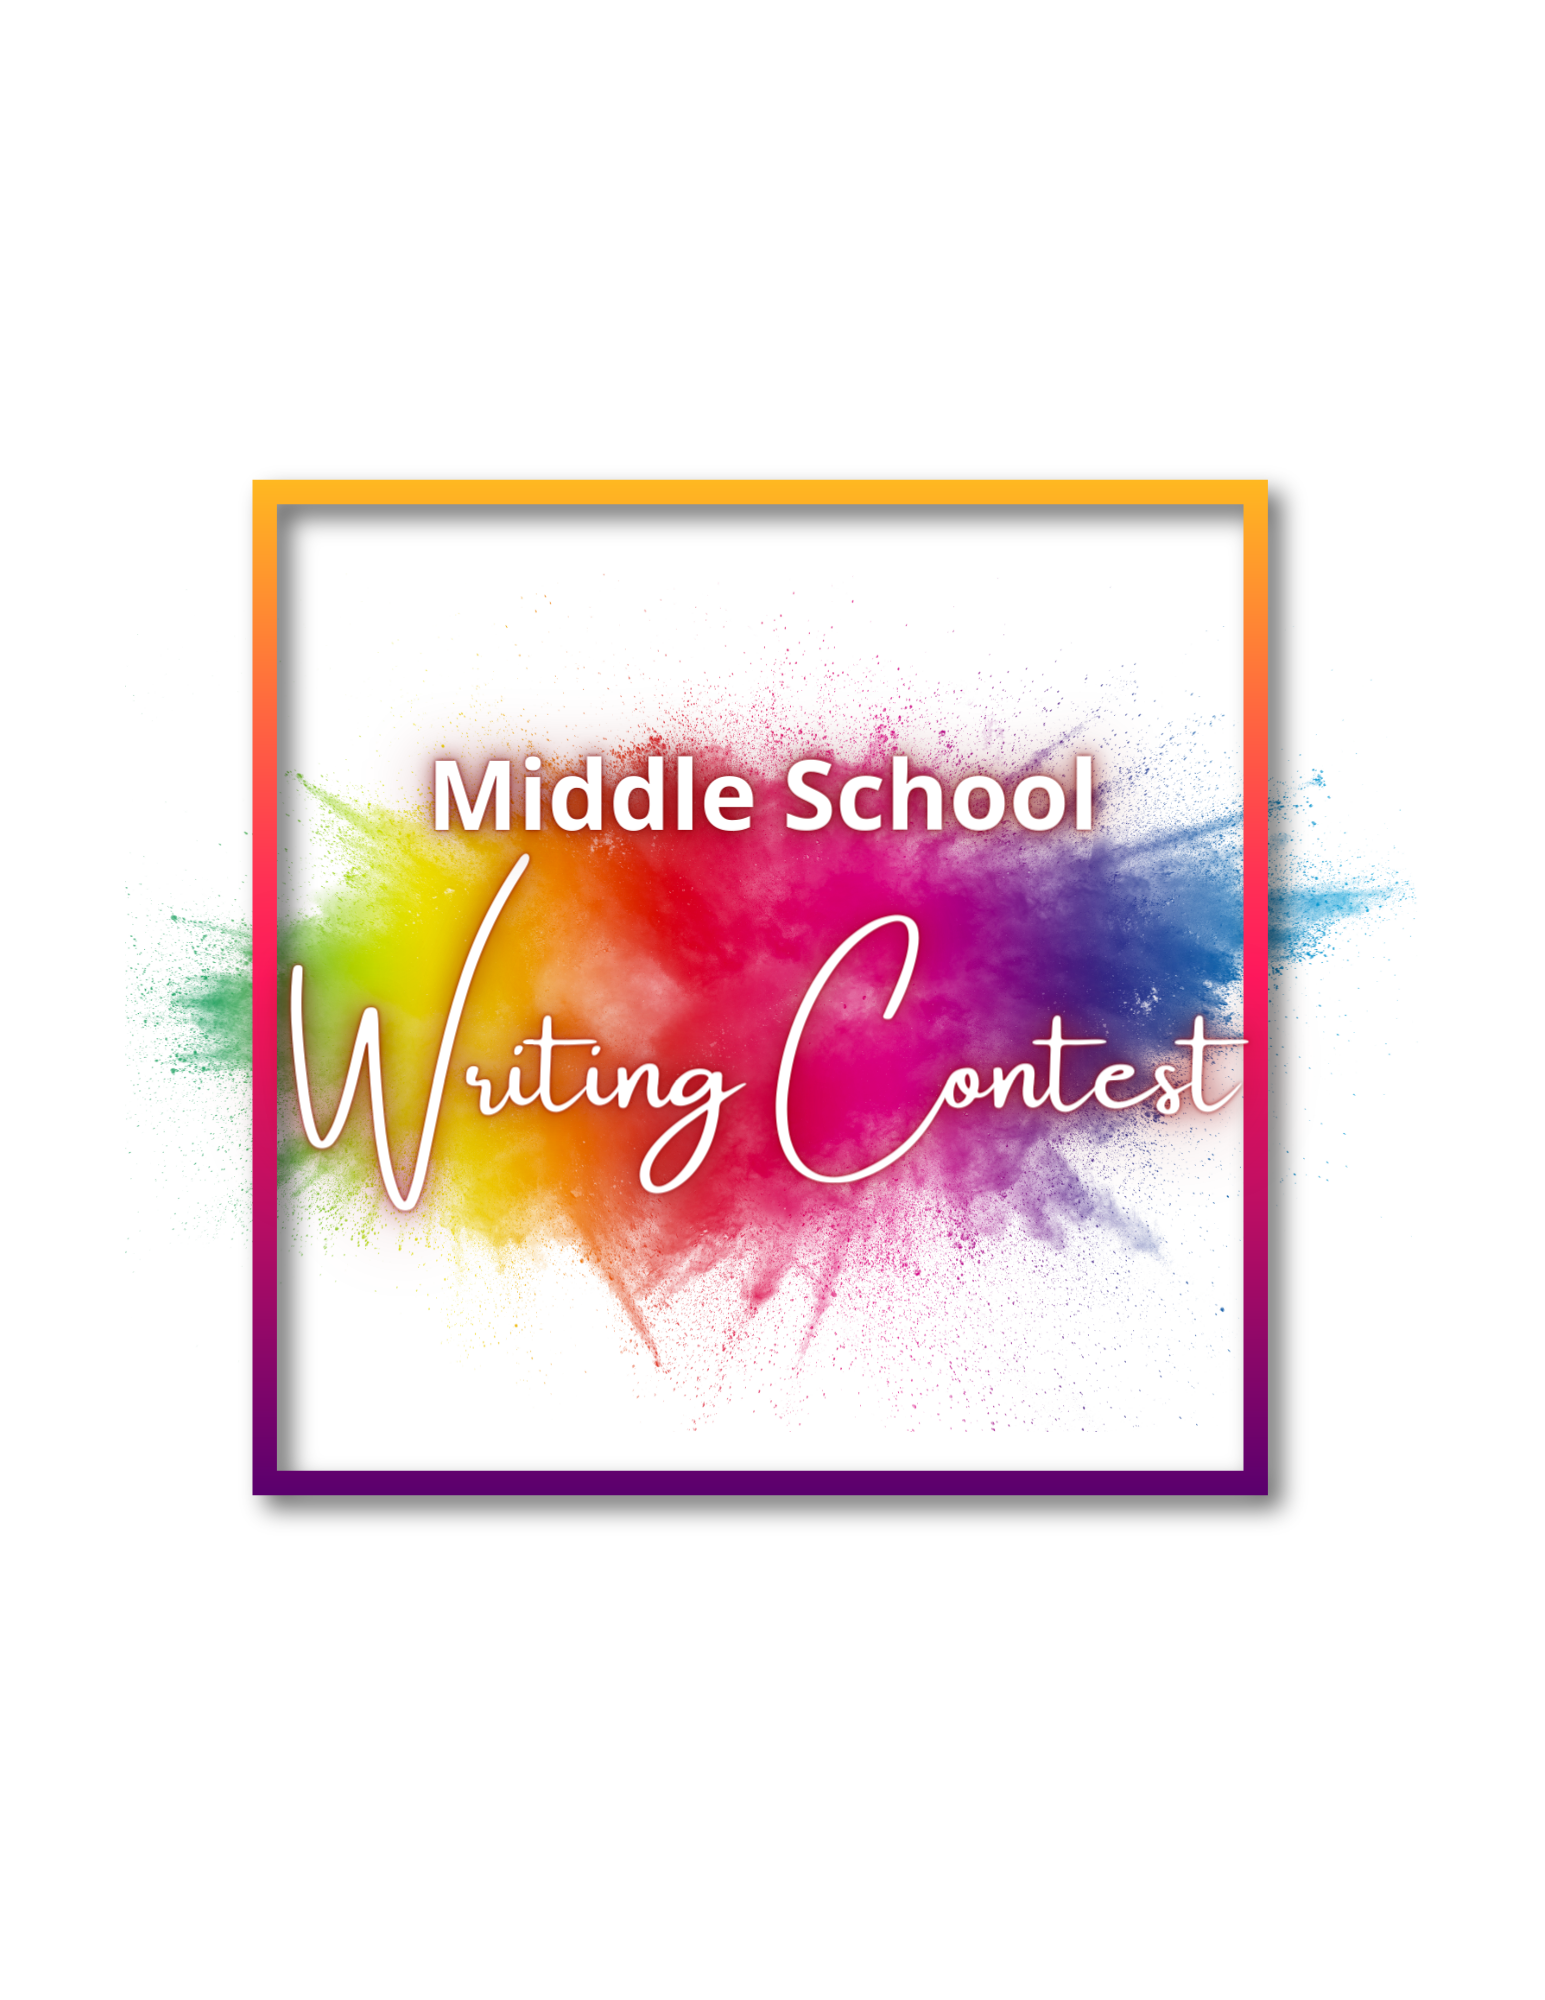 Middle School Writing